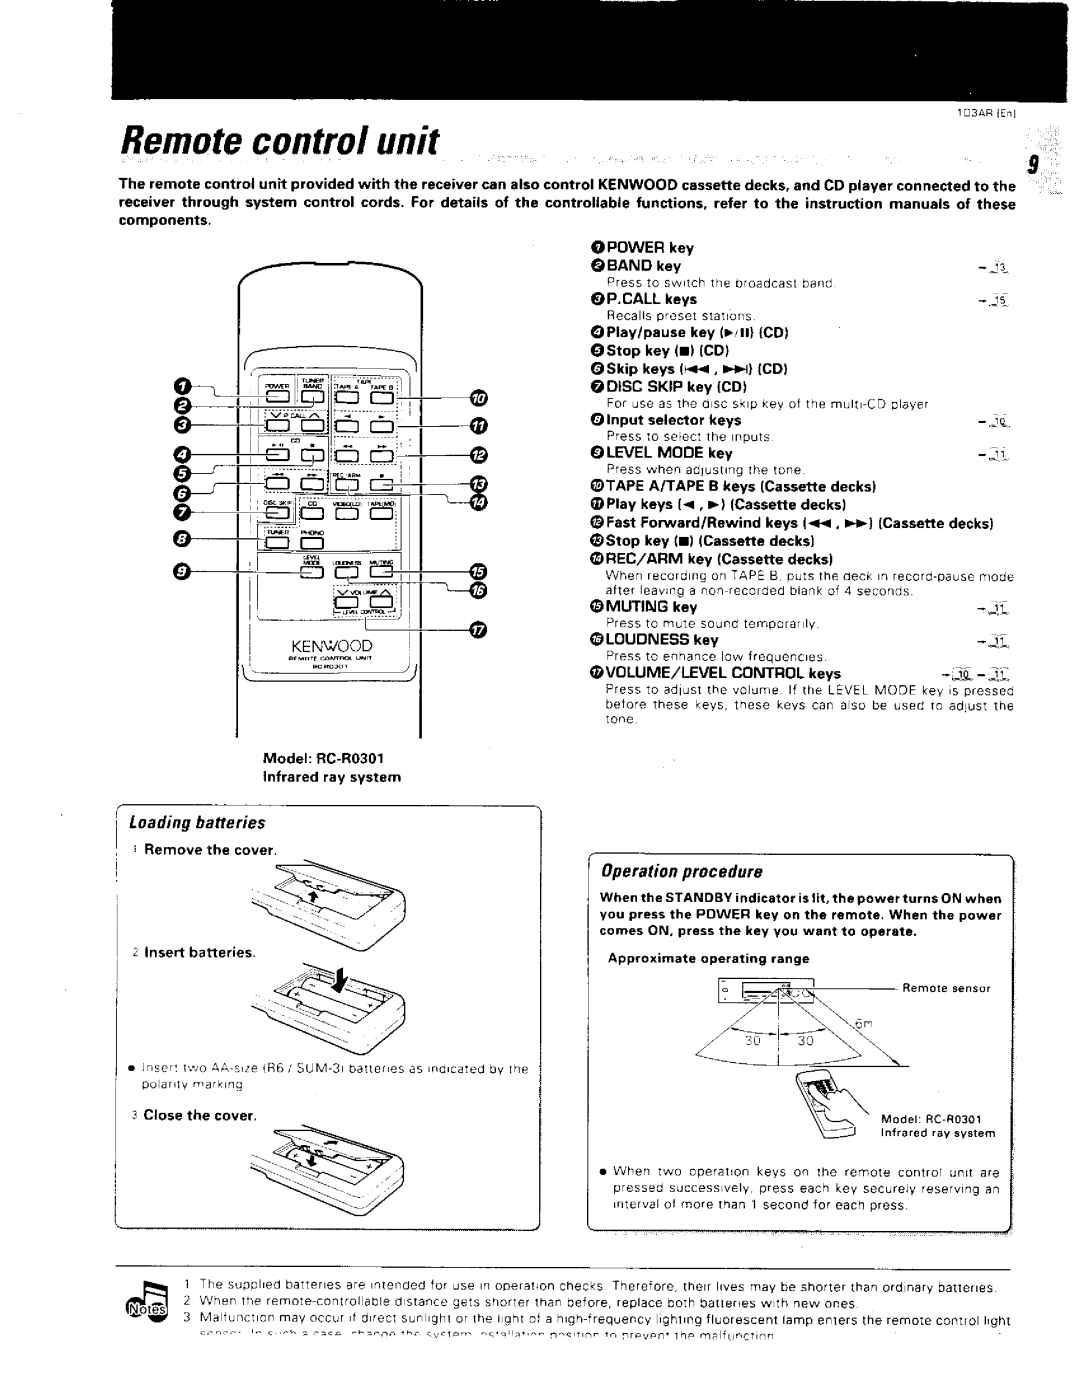 Kenwood 376, 103AR, Stereo Receiver manual 